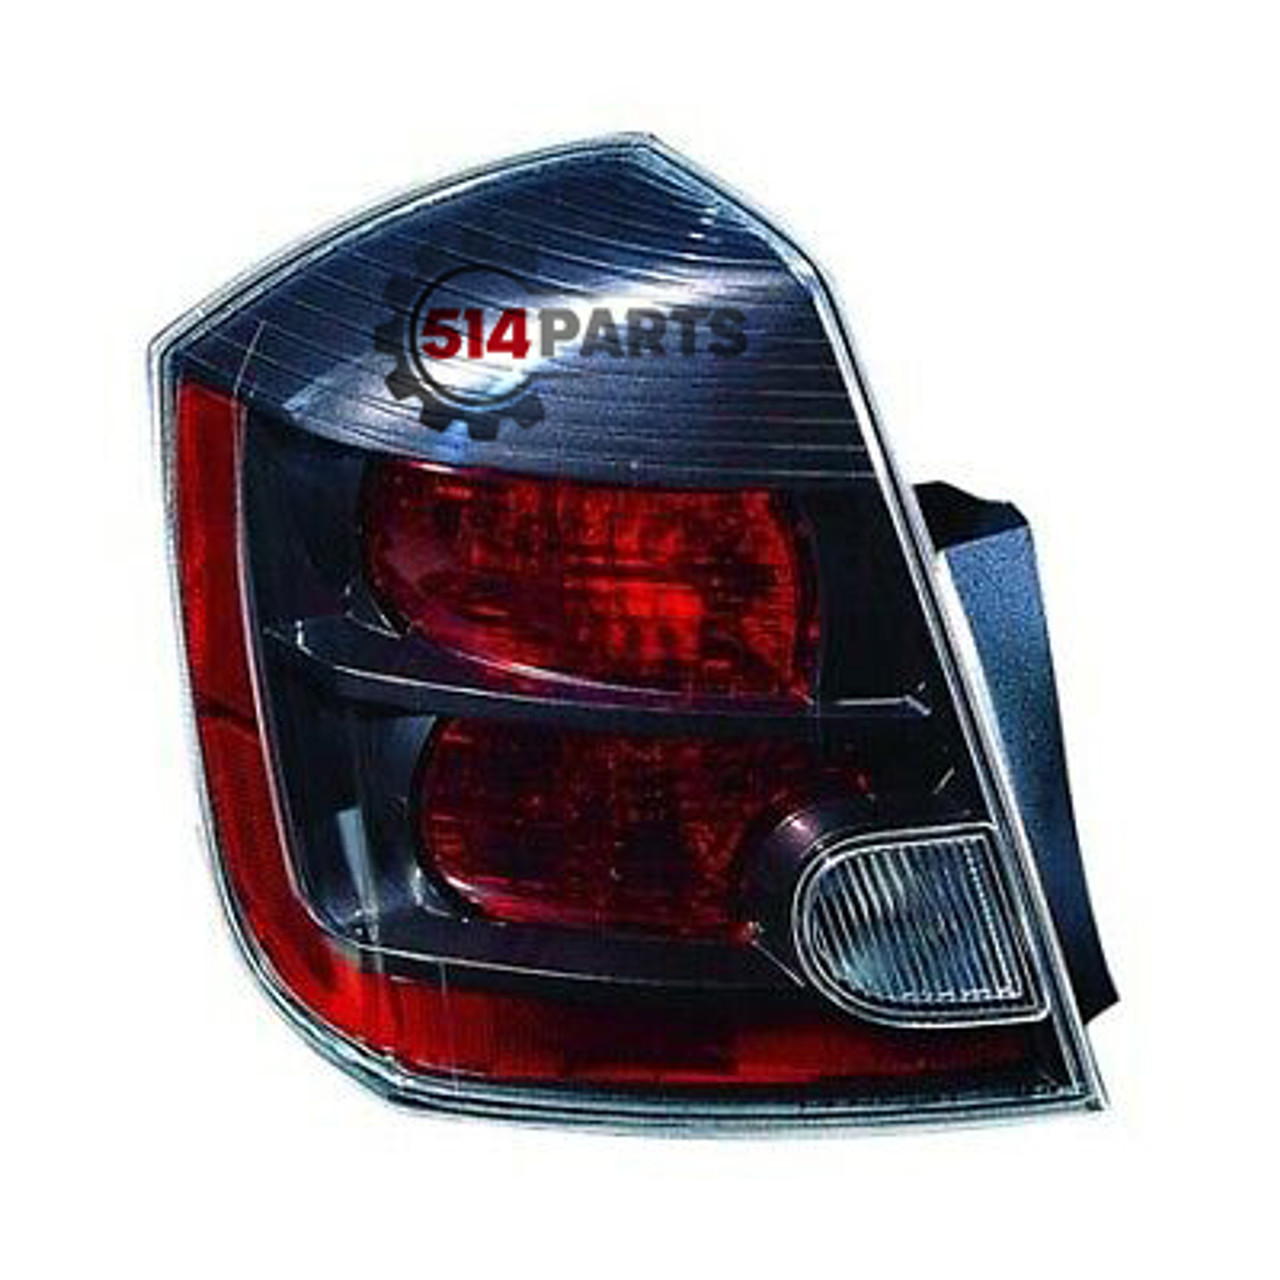 2007 - 2009 NISSAN SENTRA 2.5L TAIL LIGHTS High Quality - PHARES ARRIERE Haute Qualite